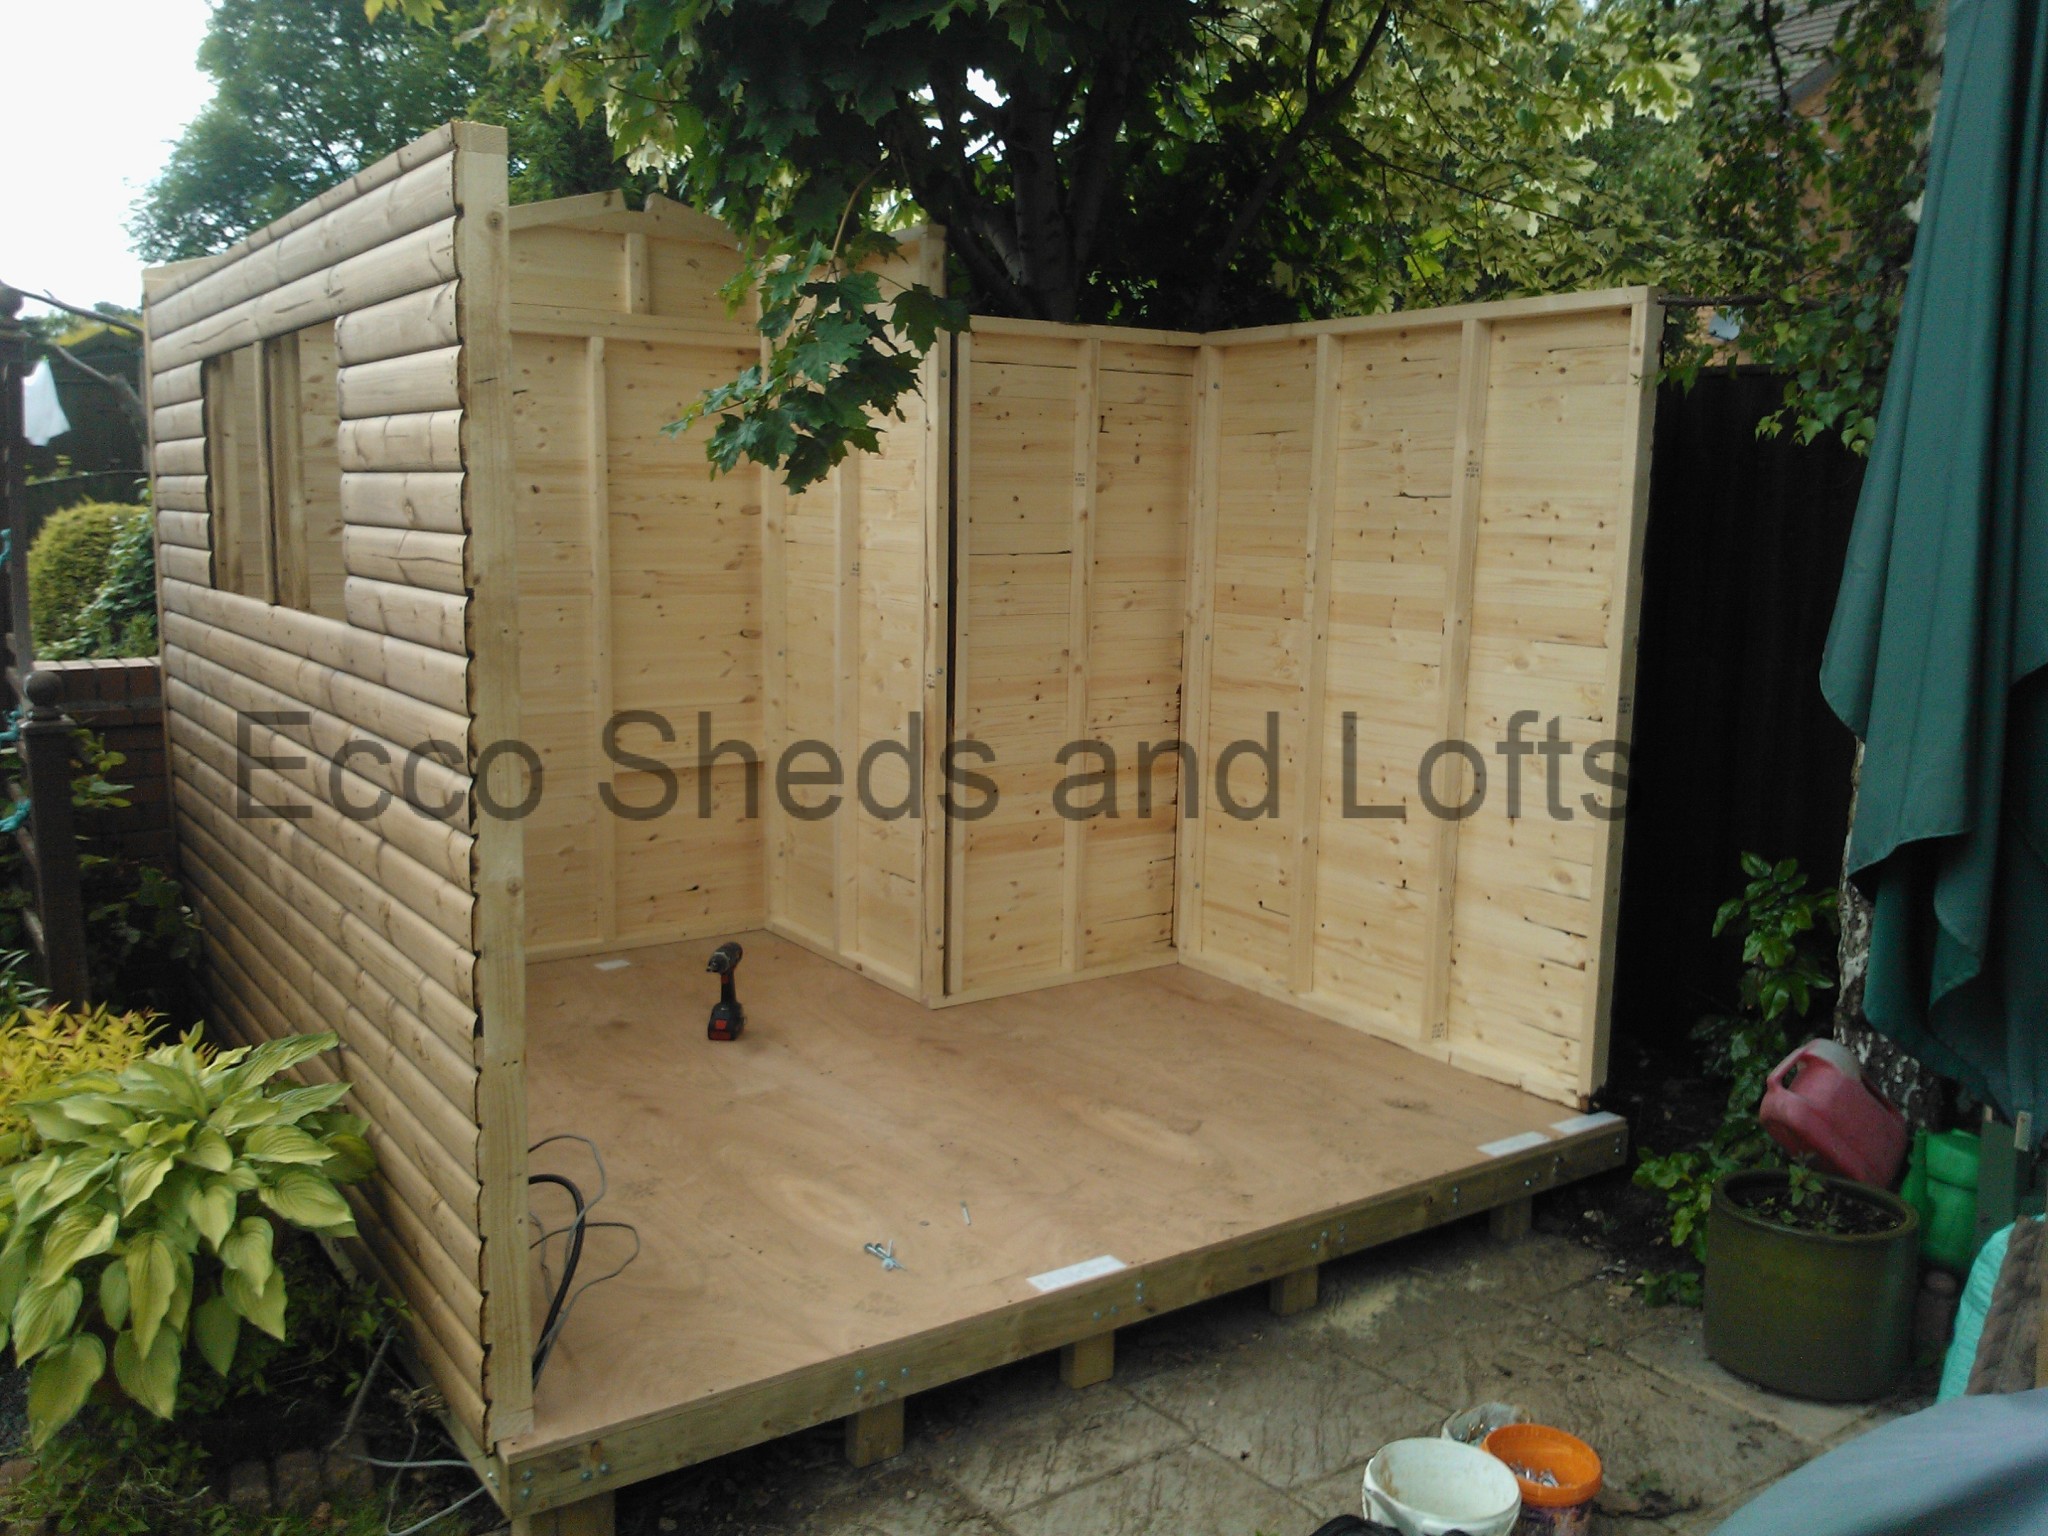 Garden Sheds - Ecco Sheds and Pigeon Lofts